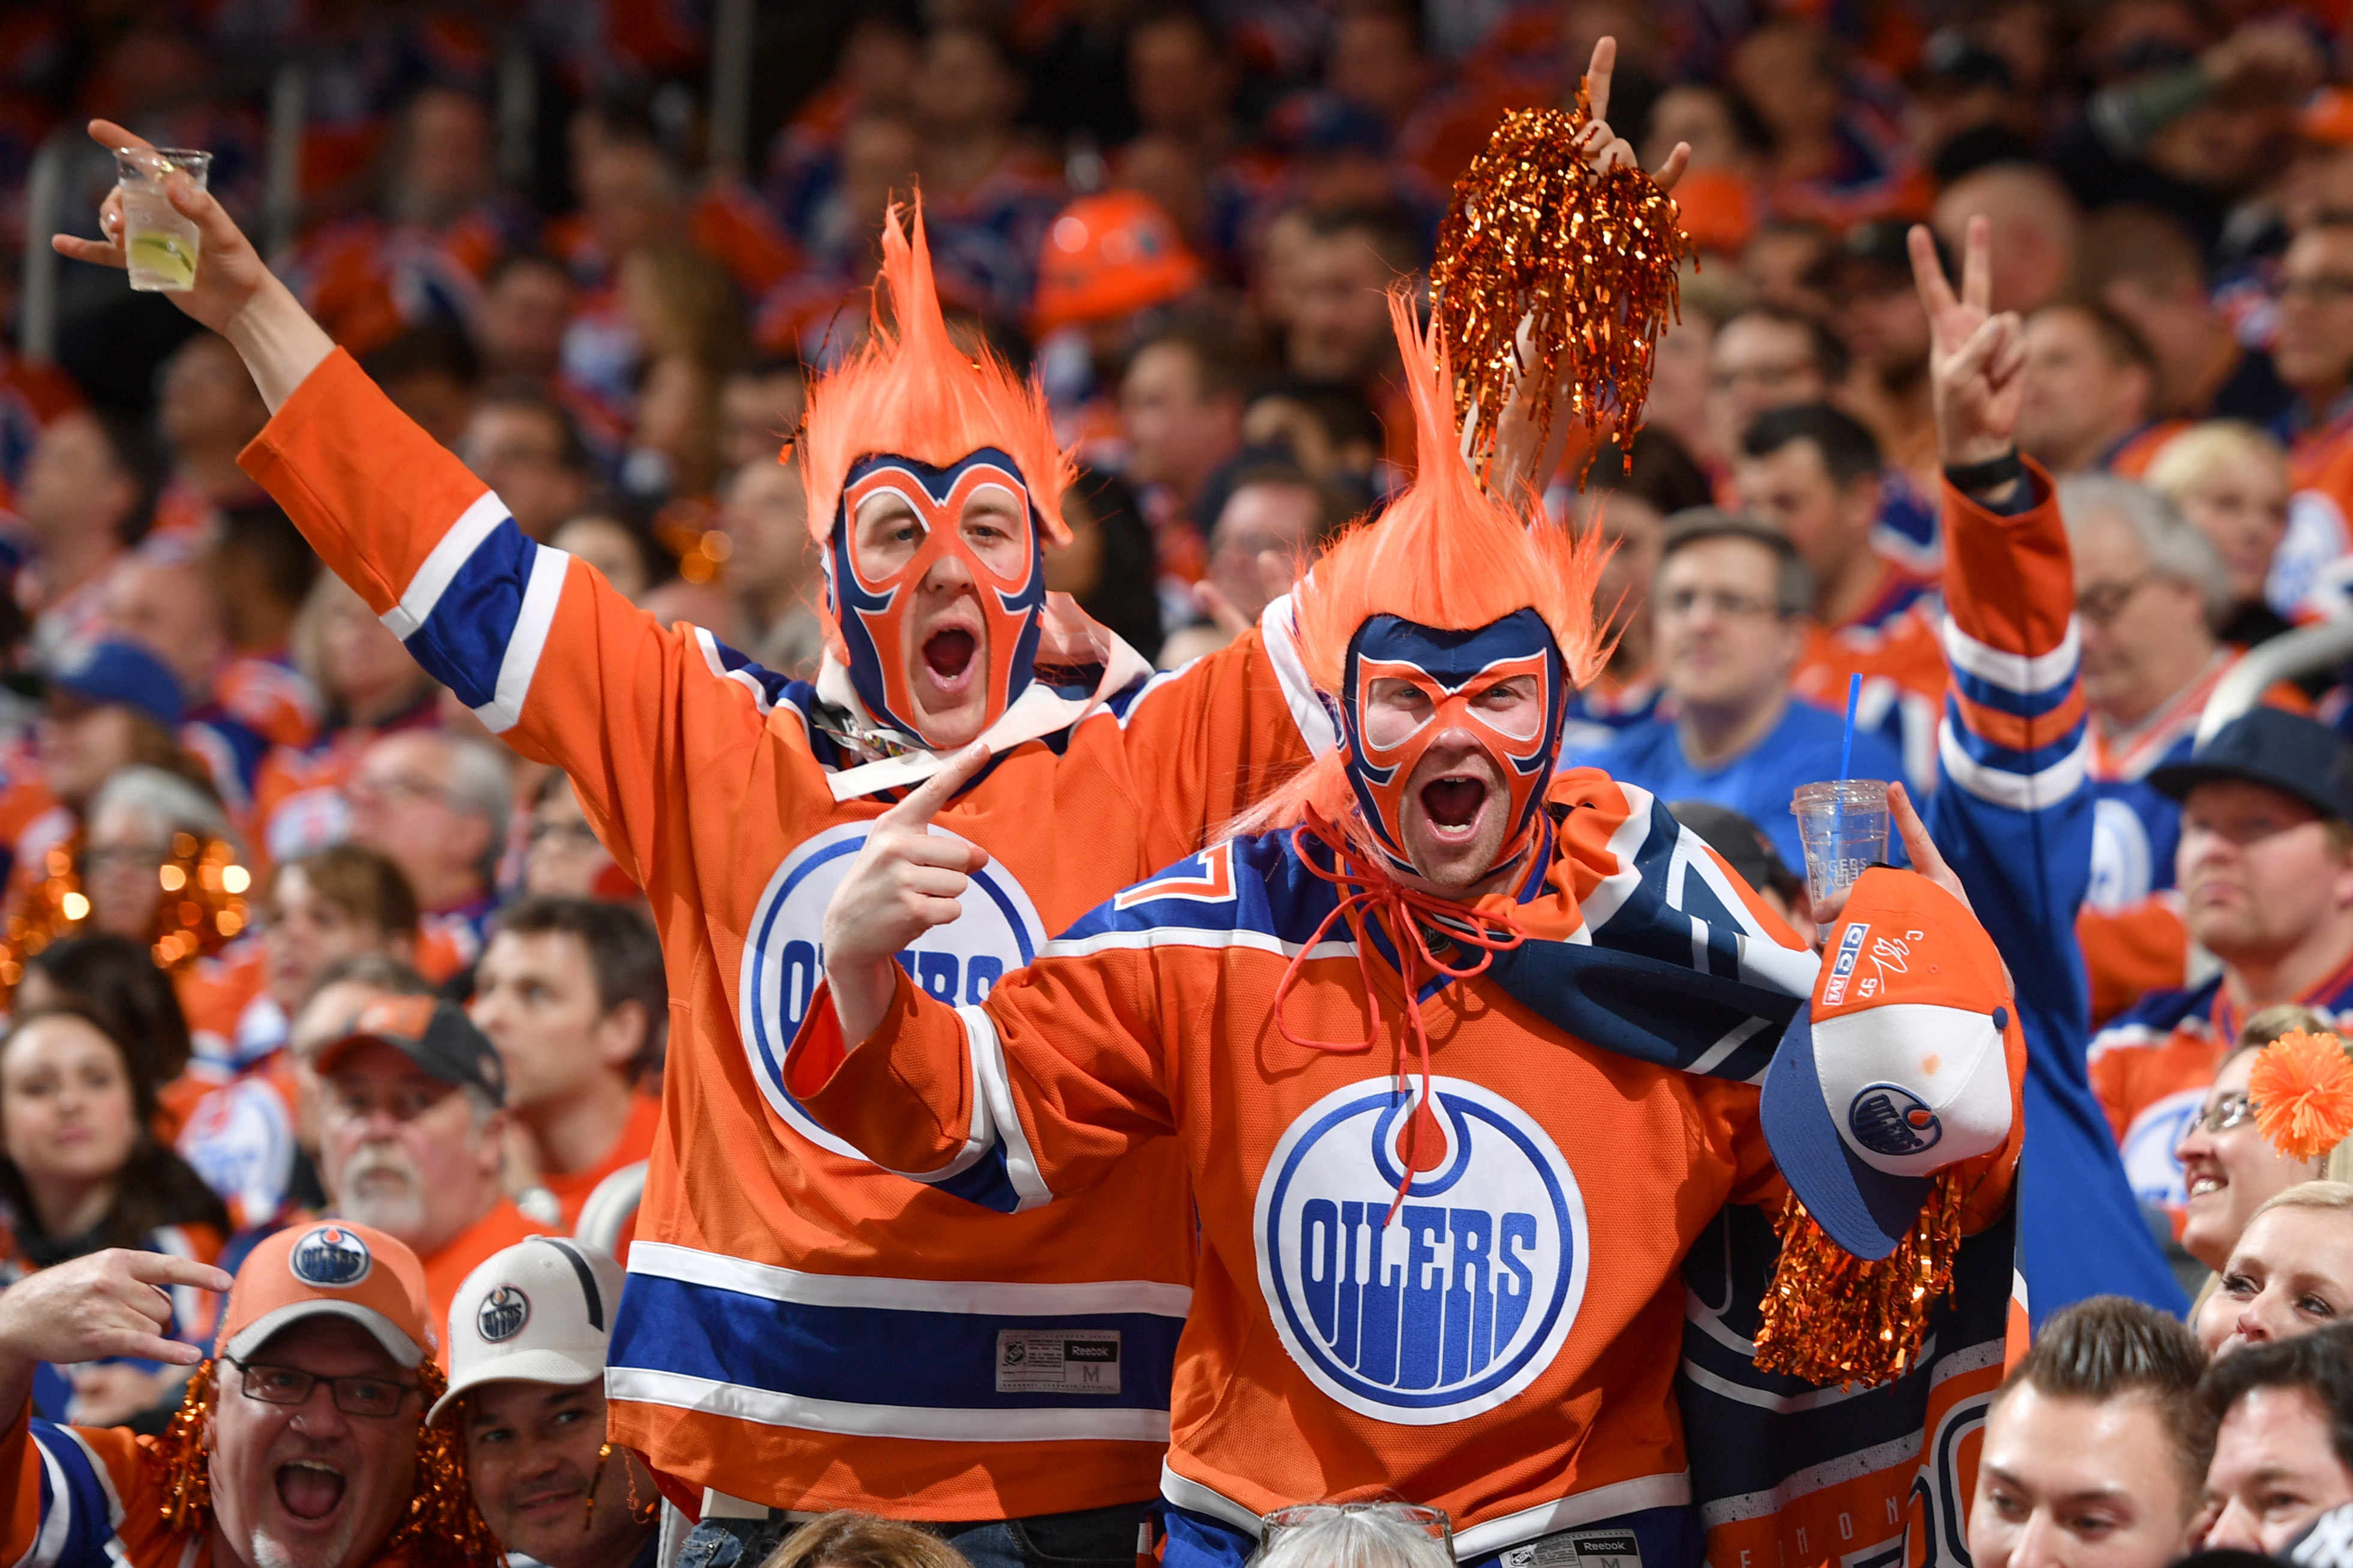 EDMONTON, AB - APRIL 12: Fans of the Edmonton Oilers celebrate after a goal during Game One of the Western Conference First Round during the 2017 NHL Stanley Cup Playoffs against the San Jose Sharks on April 12, 2017 at Rogers Place in Edmonton, Alberta, Canada. (Photo by Andy Devlin/NHLI via Getty Images)